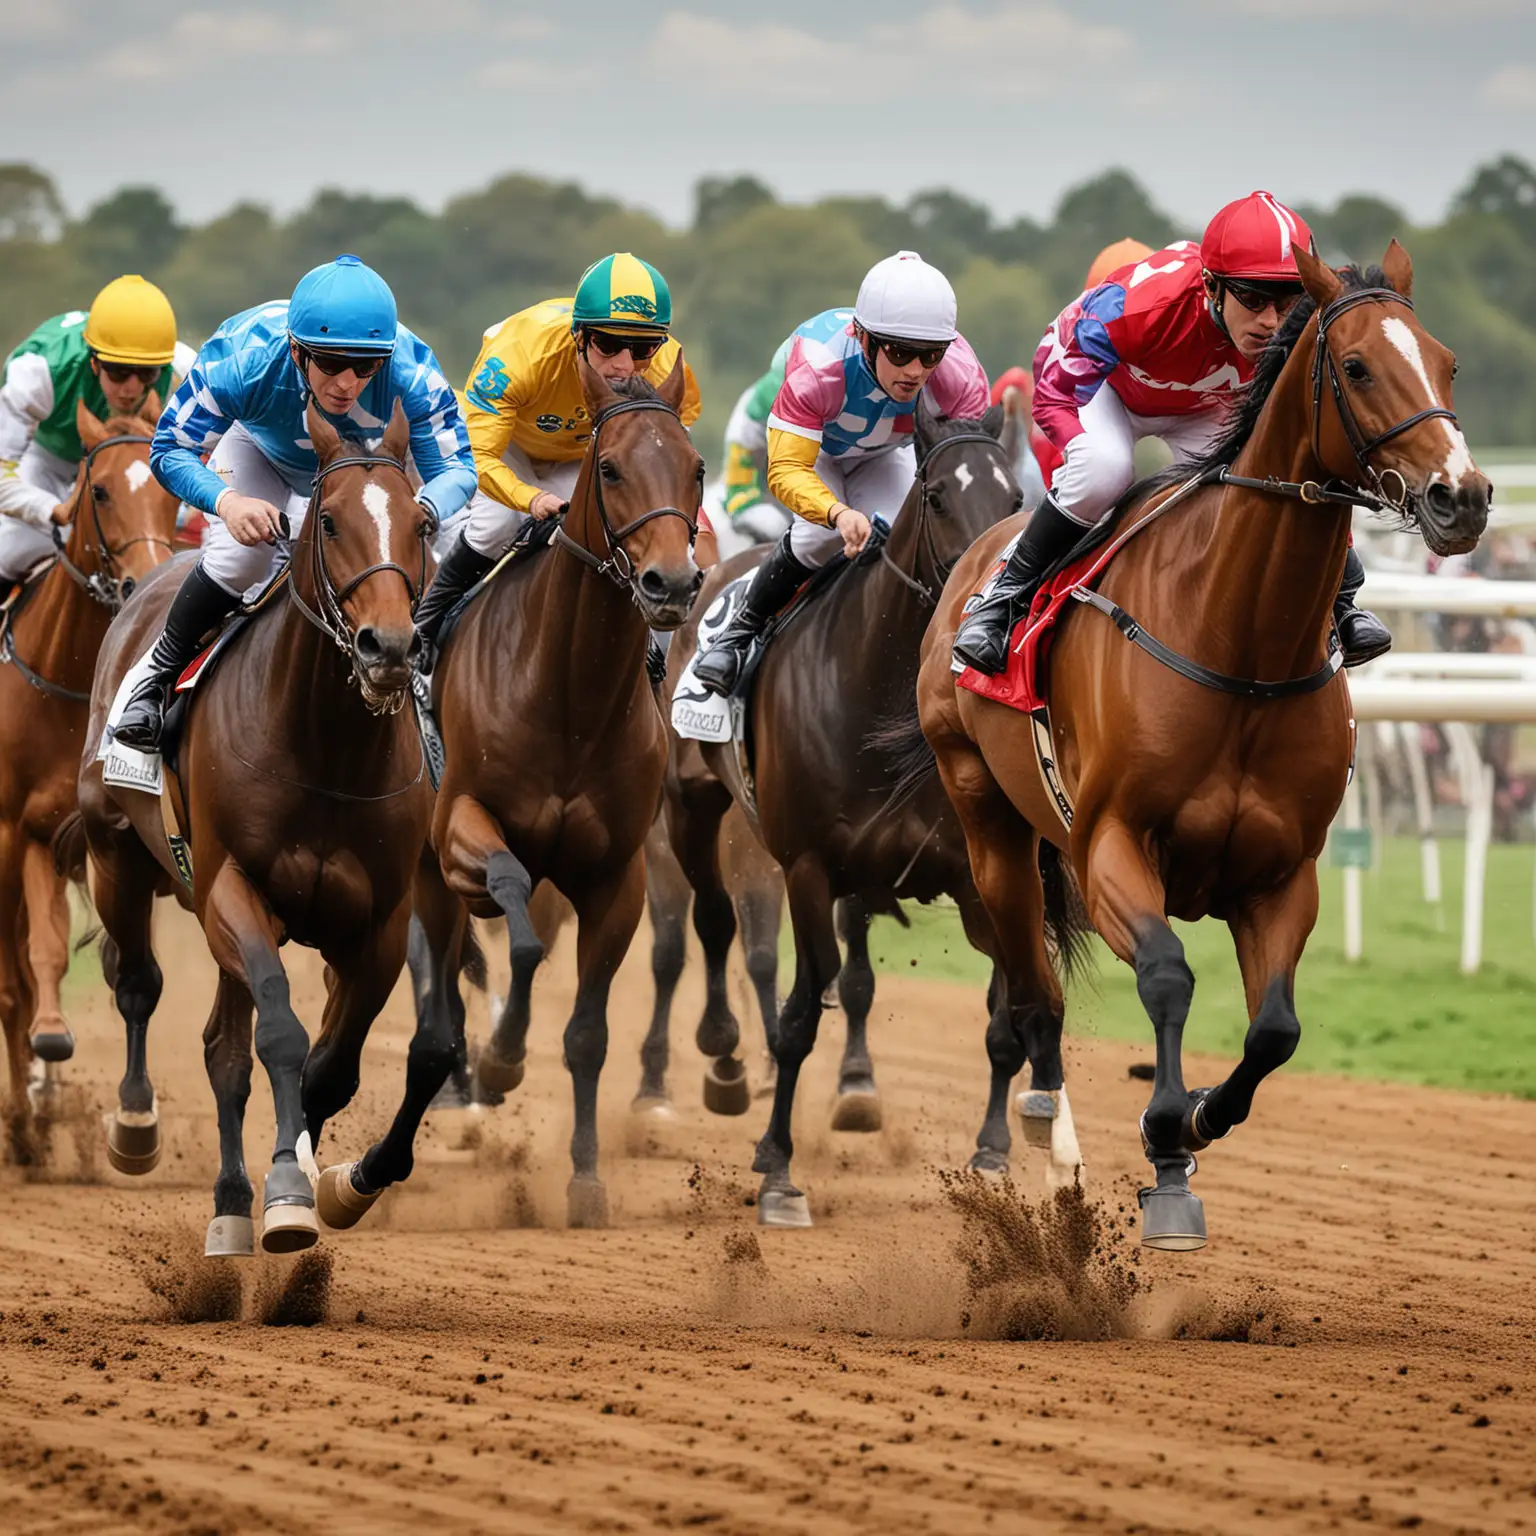 create an image of 3 horse racing around a track, with jockeys background to include a calendar